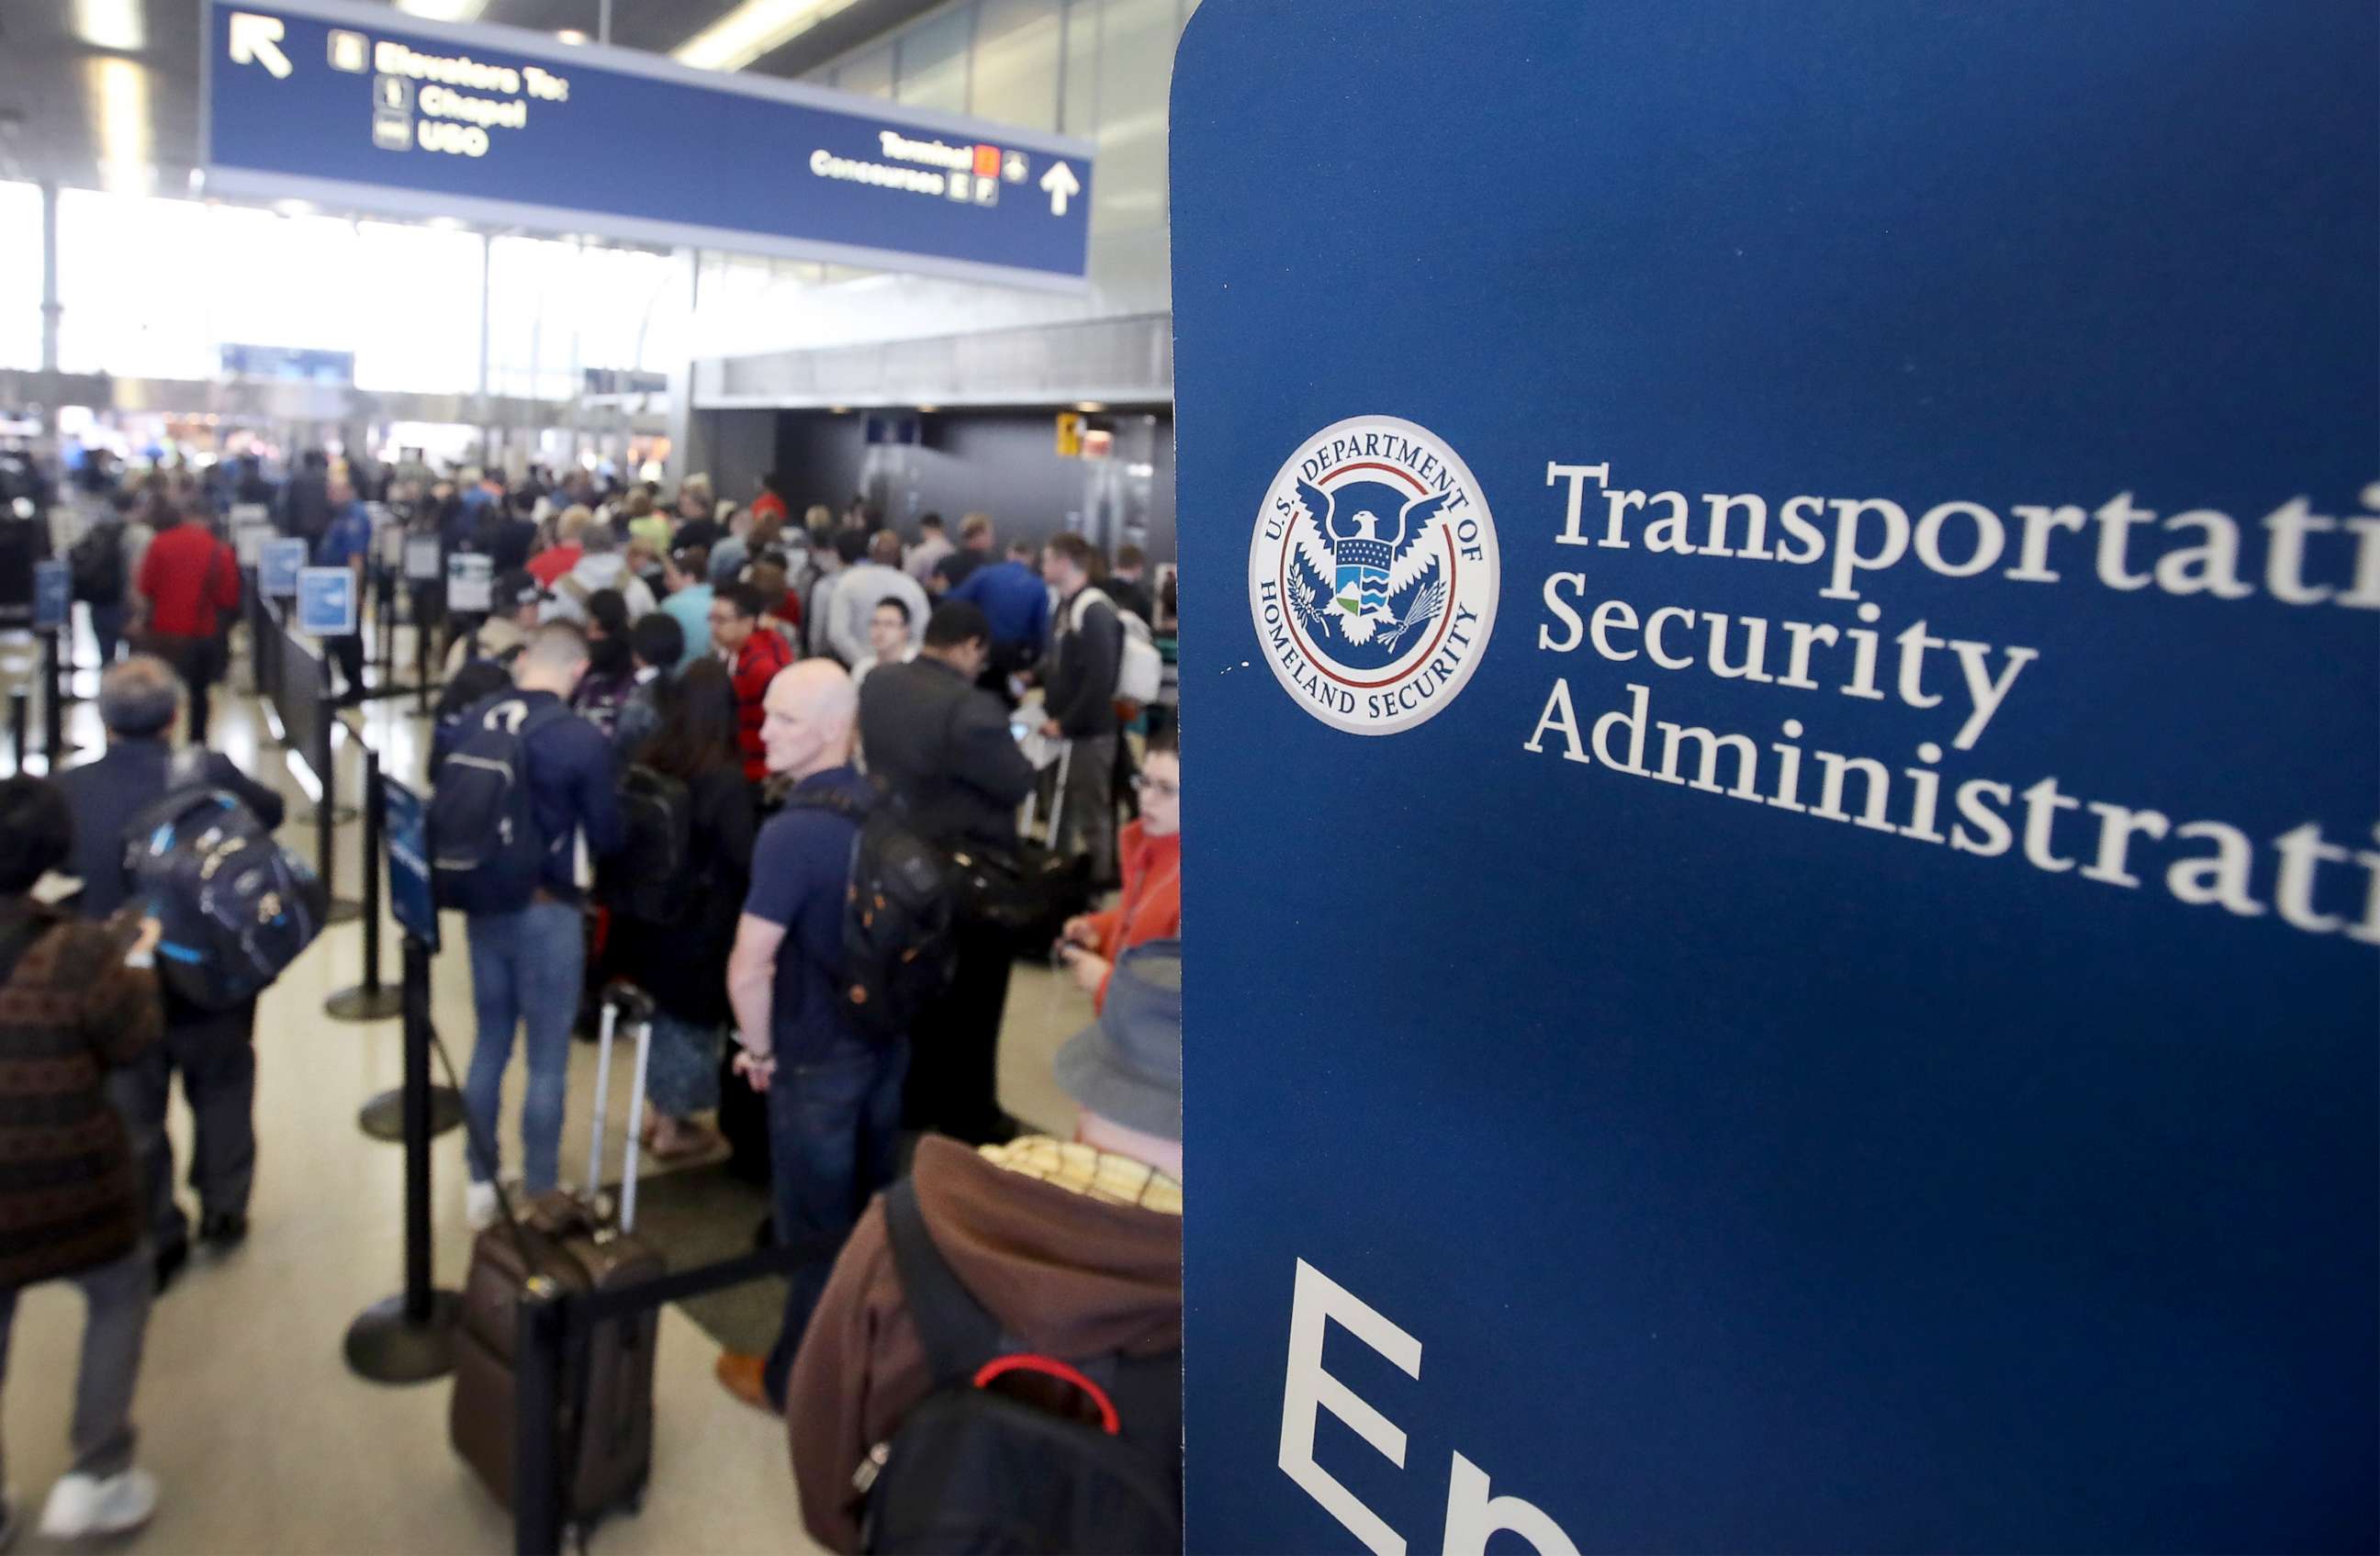 PHOTO: Passengers at O'Hare International Airport wait in line to be screened at a Transportation Security Administration (TSA) checkpoint.